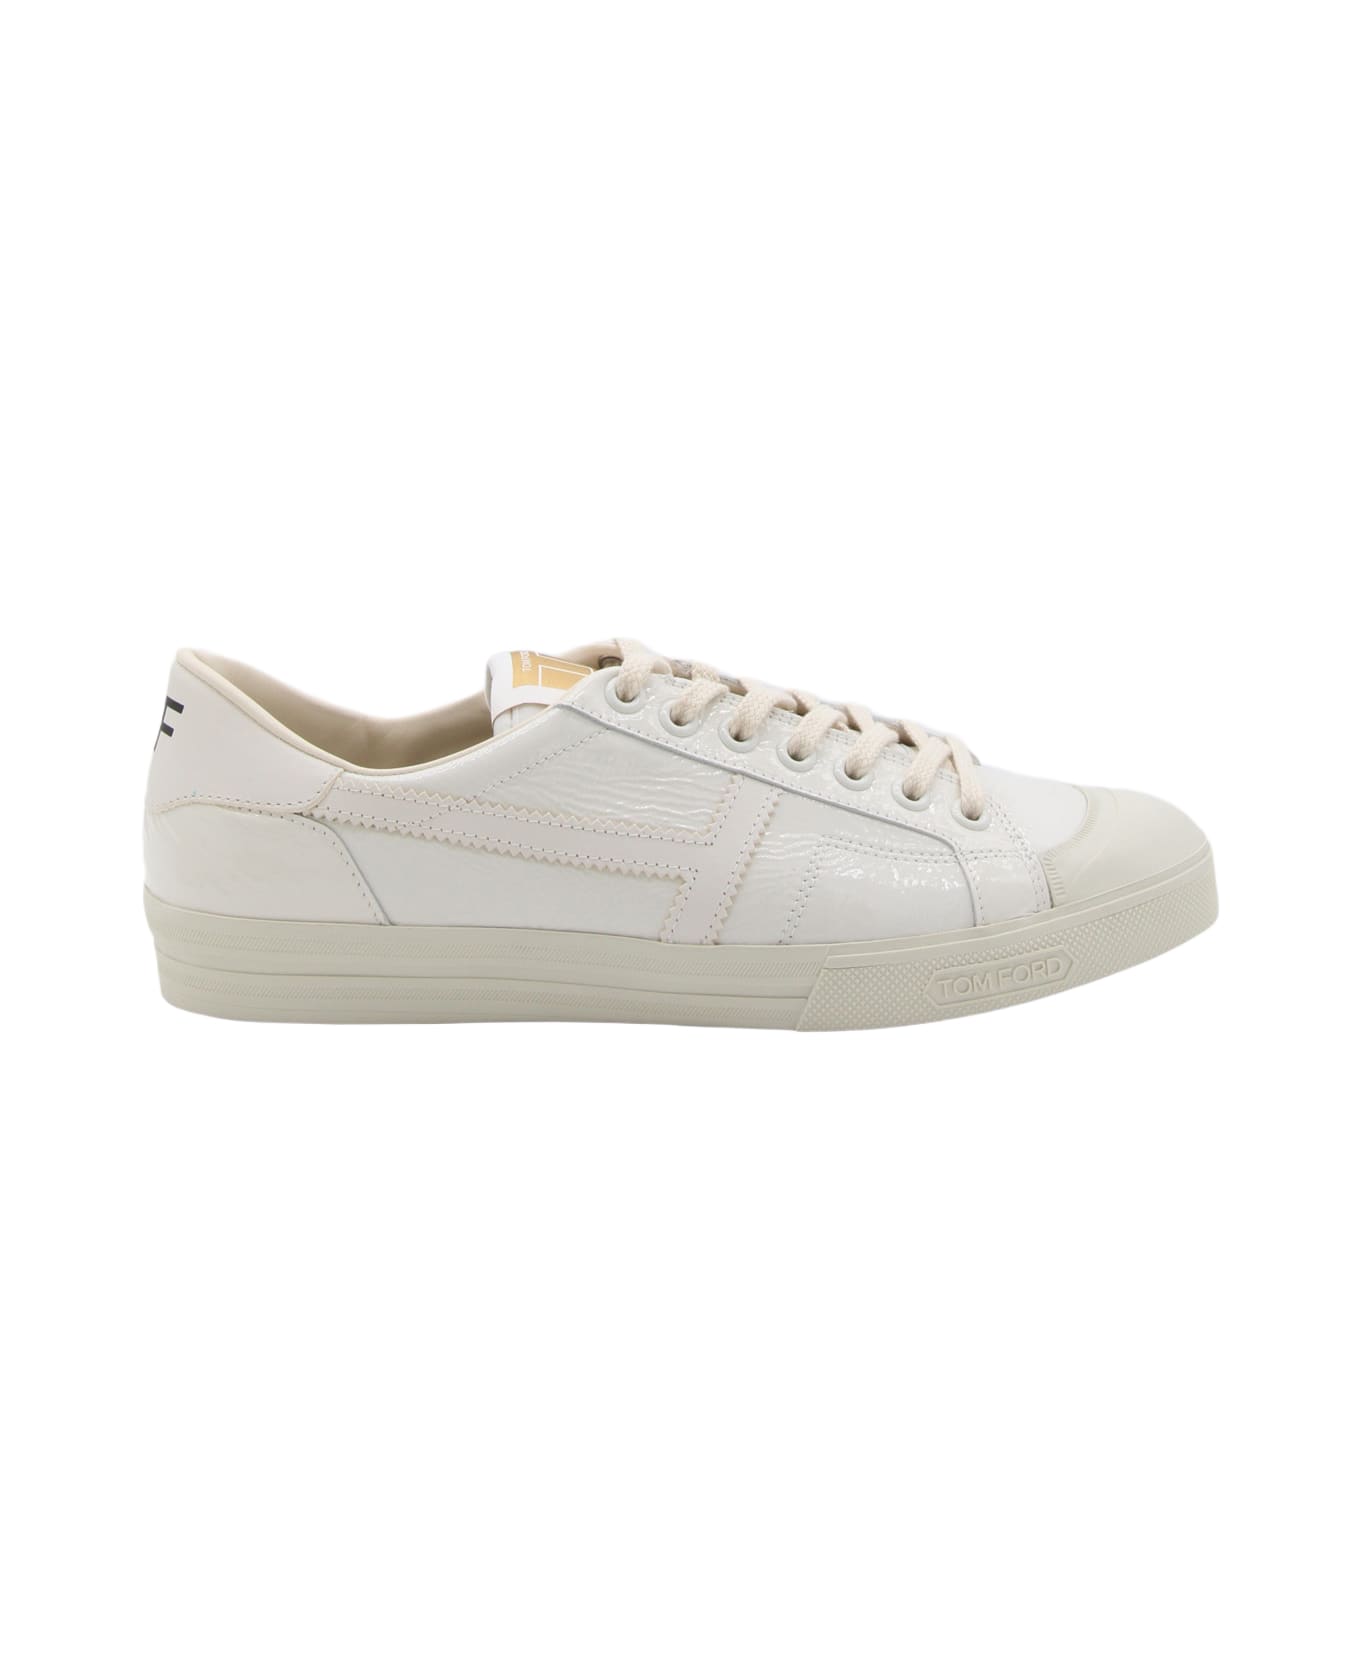 Tom Ford White Leather Low Top Sneakers - CHALK + CREAM